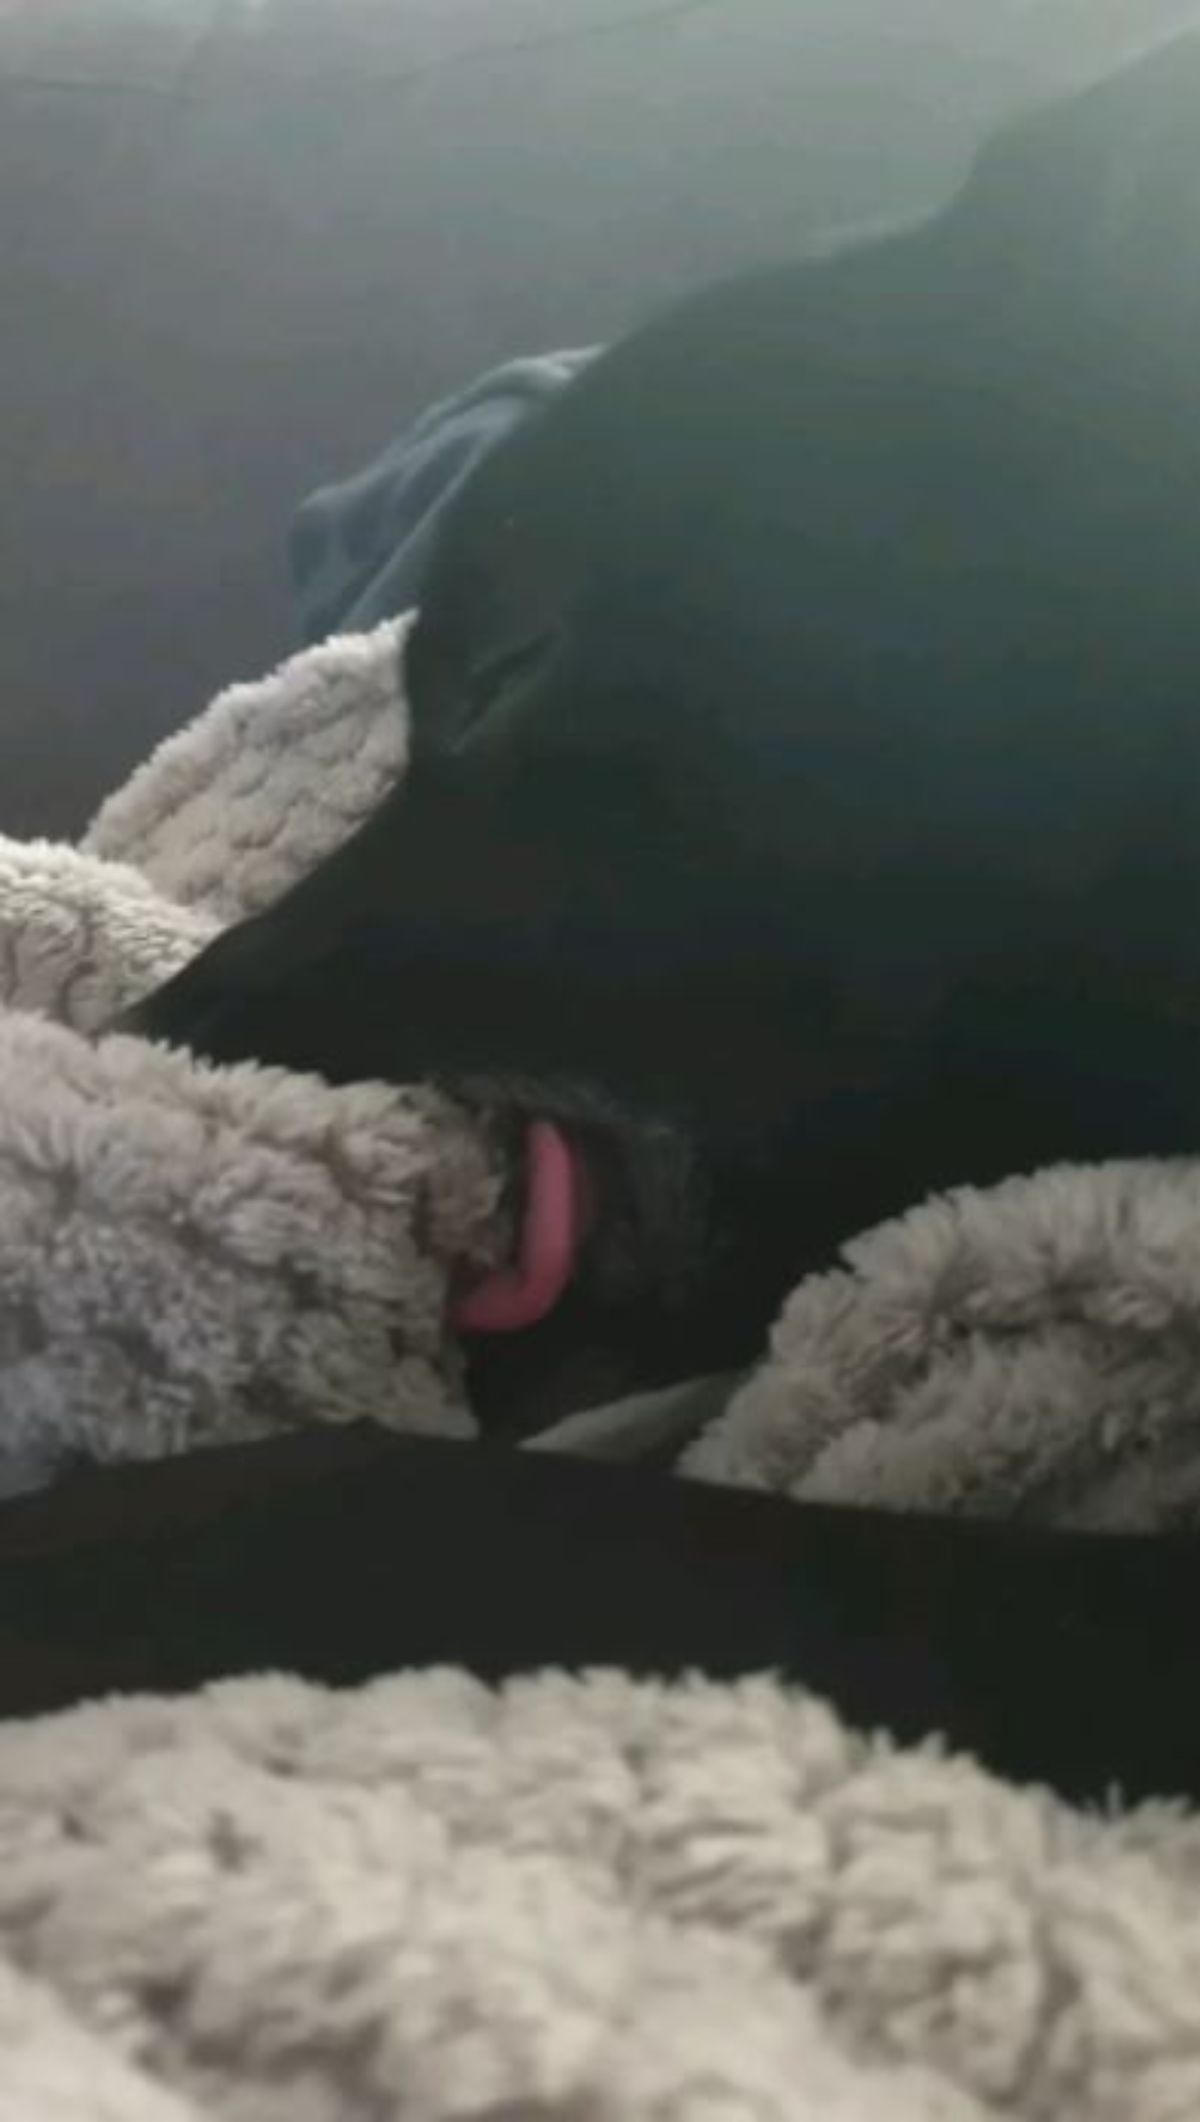 black dog sleeping and sucking on a white knitted blanket with the tongue sticking out slightly